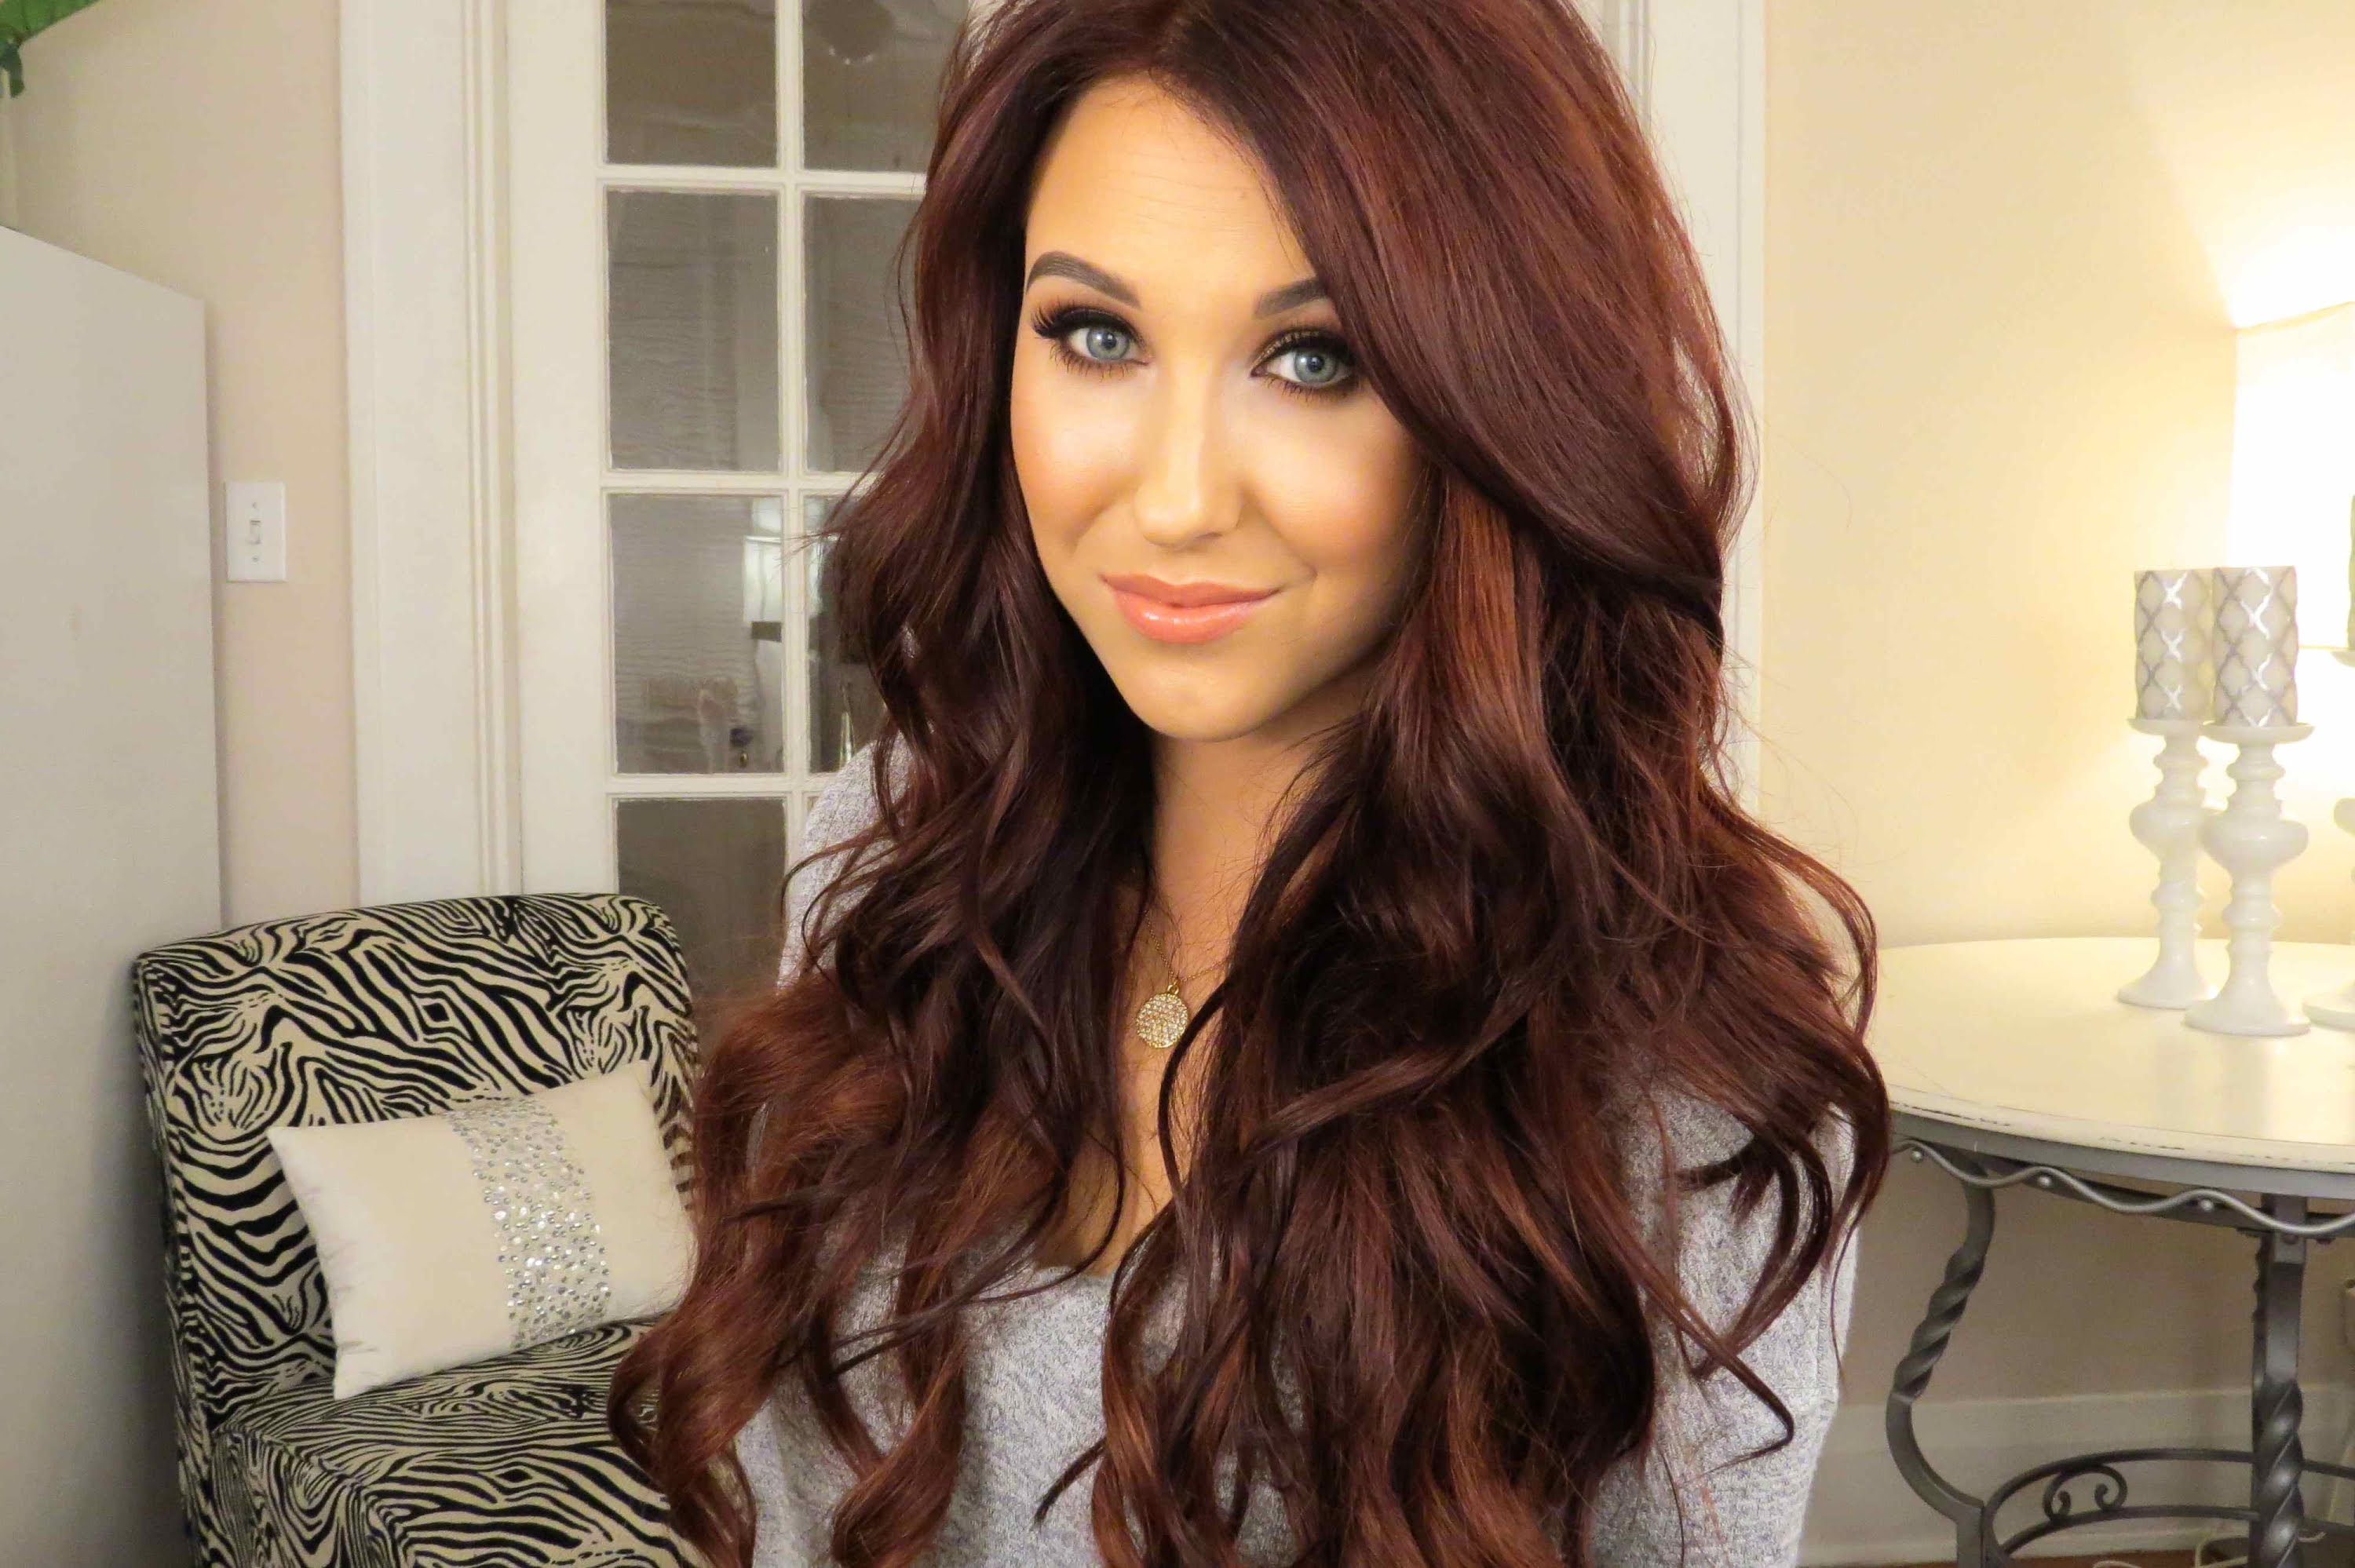 Fiber hair extensions look very stylish and